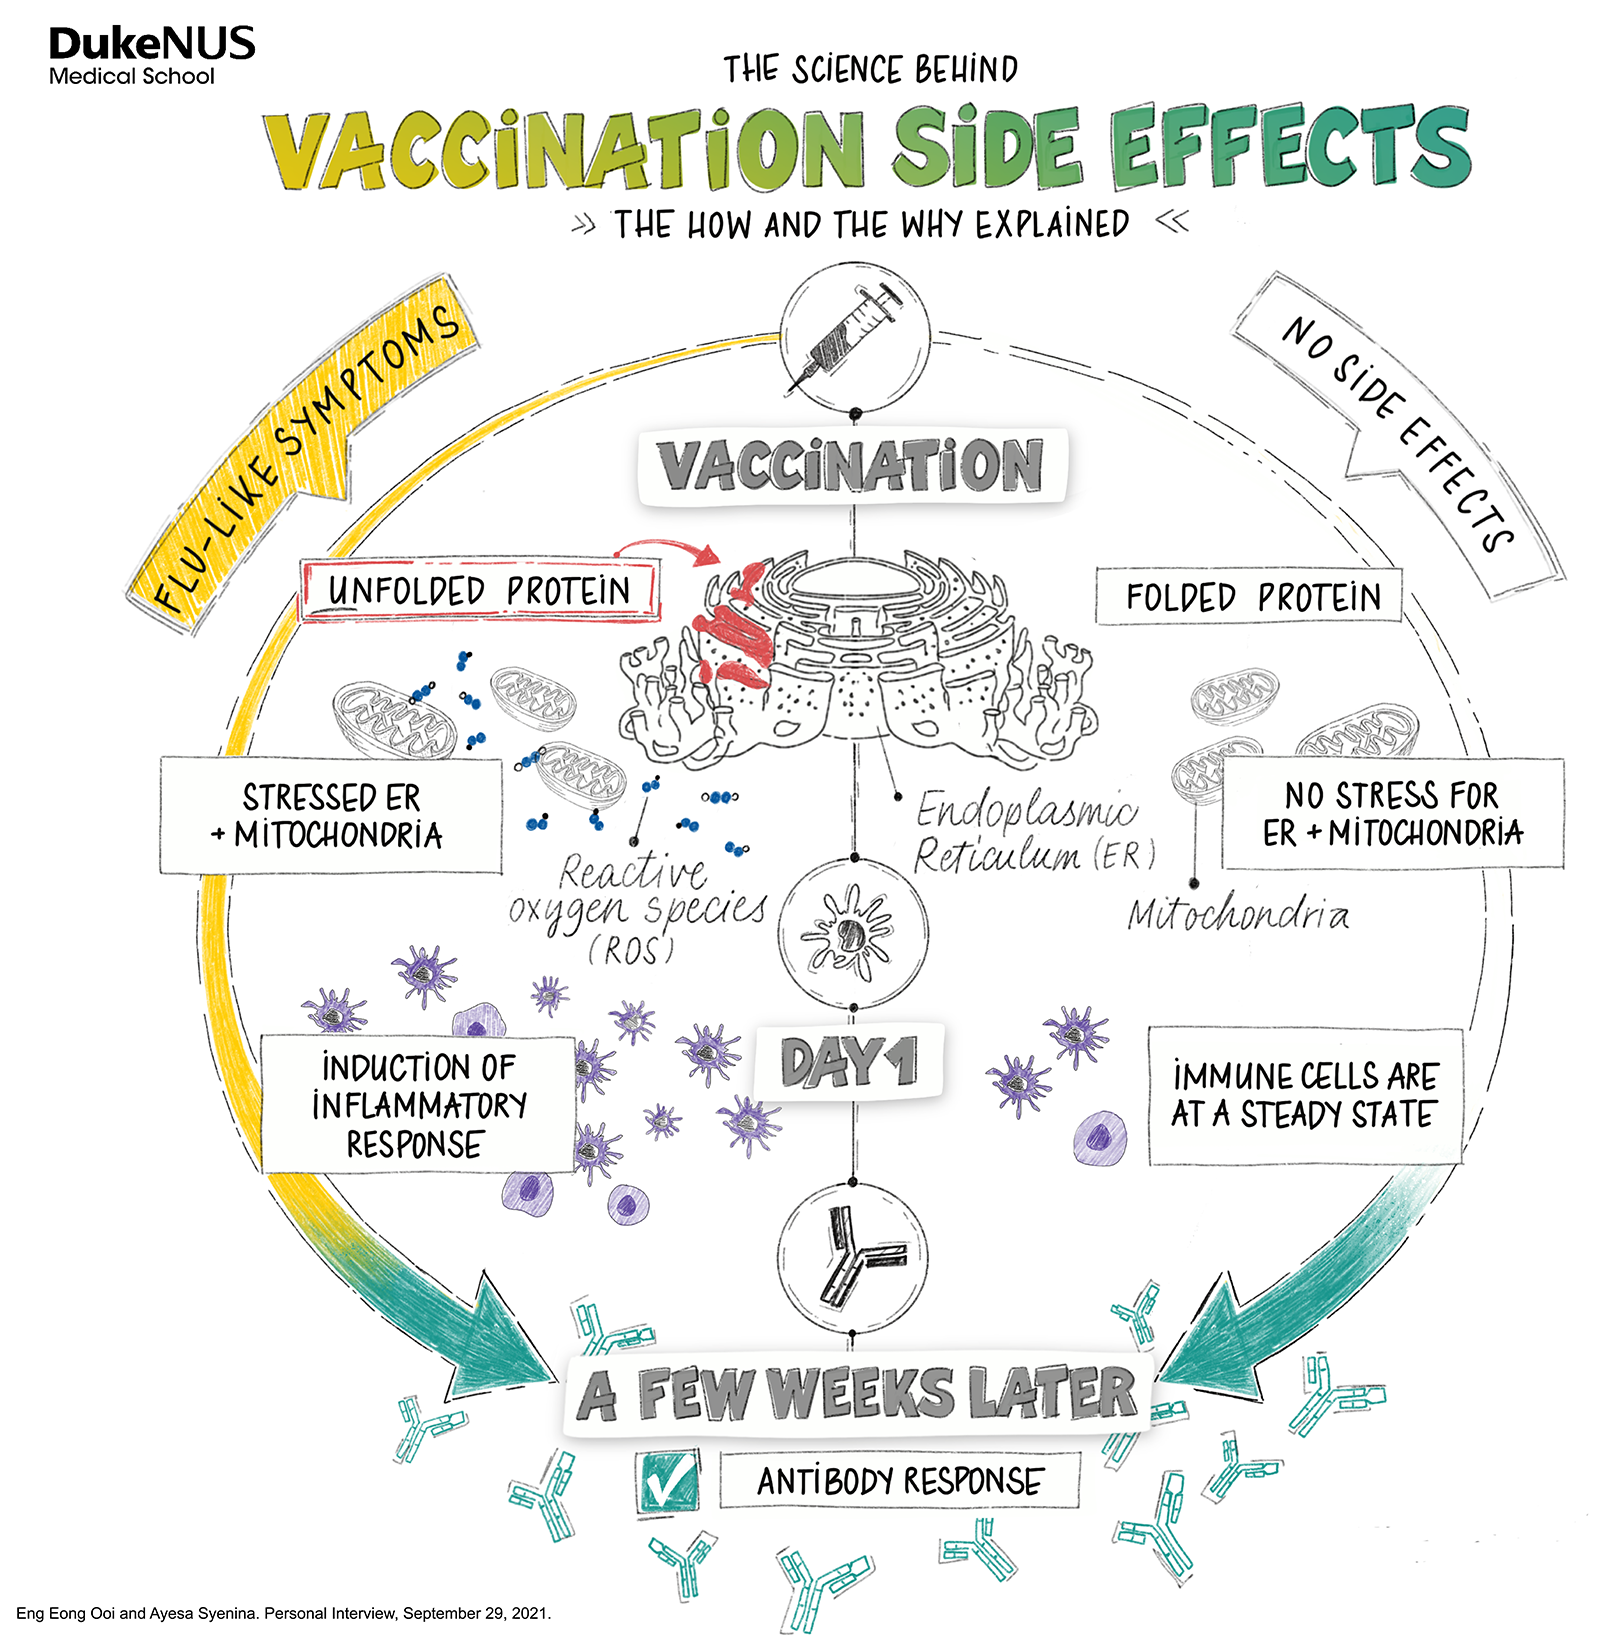 The science behind vaccination side effects